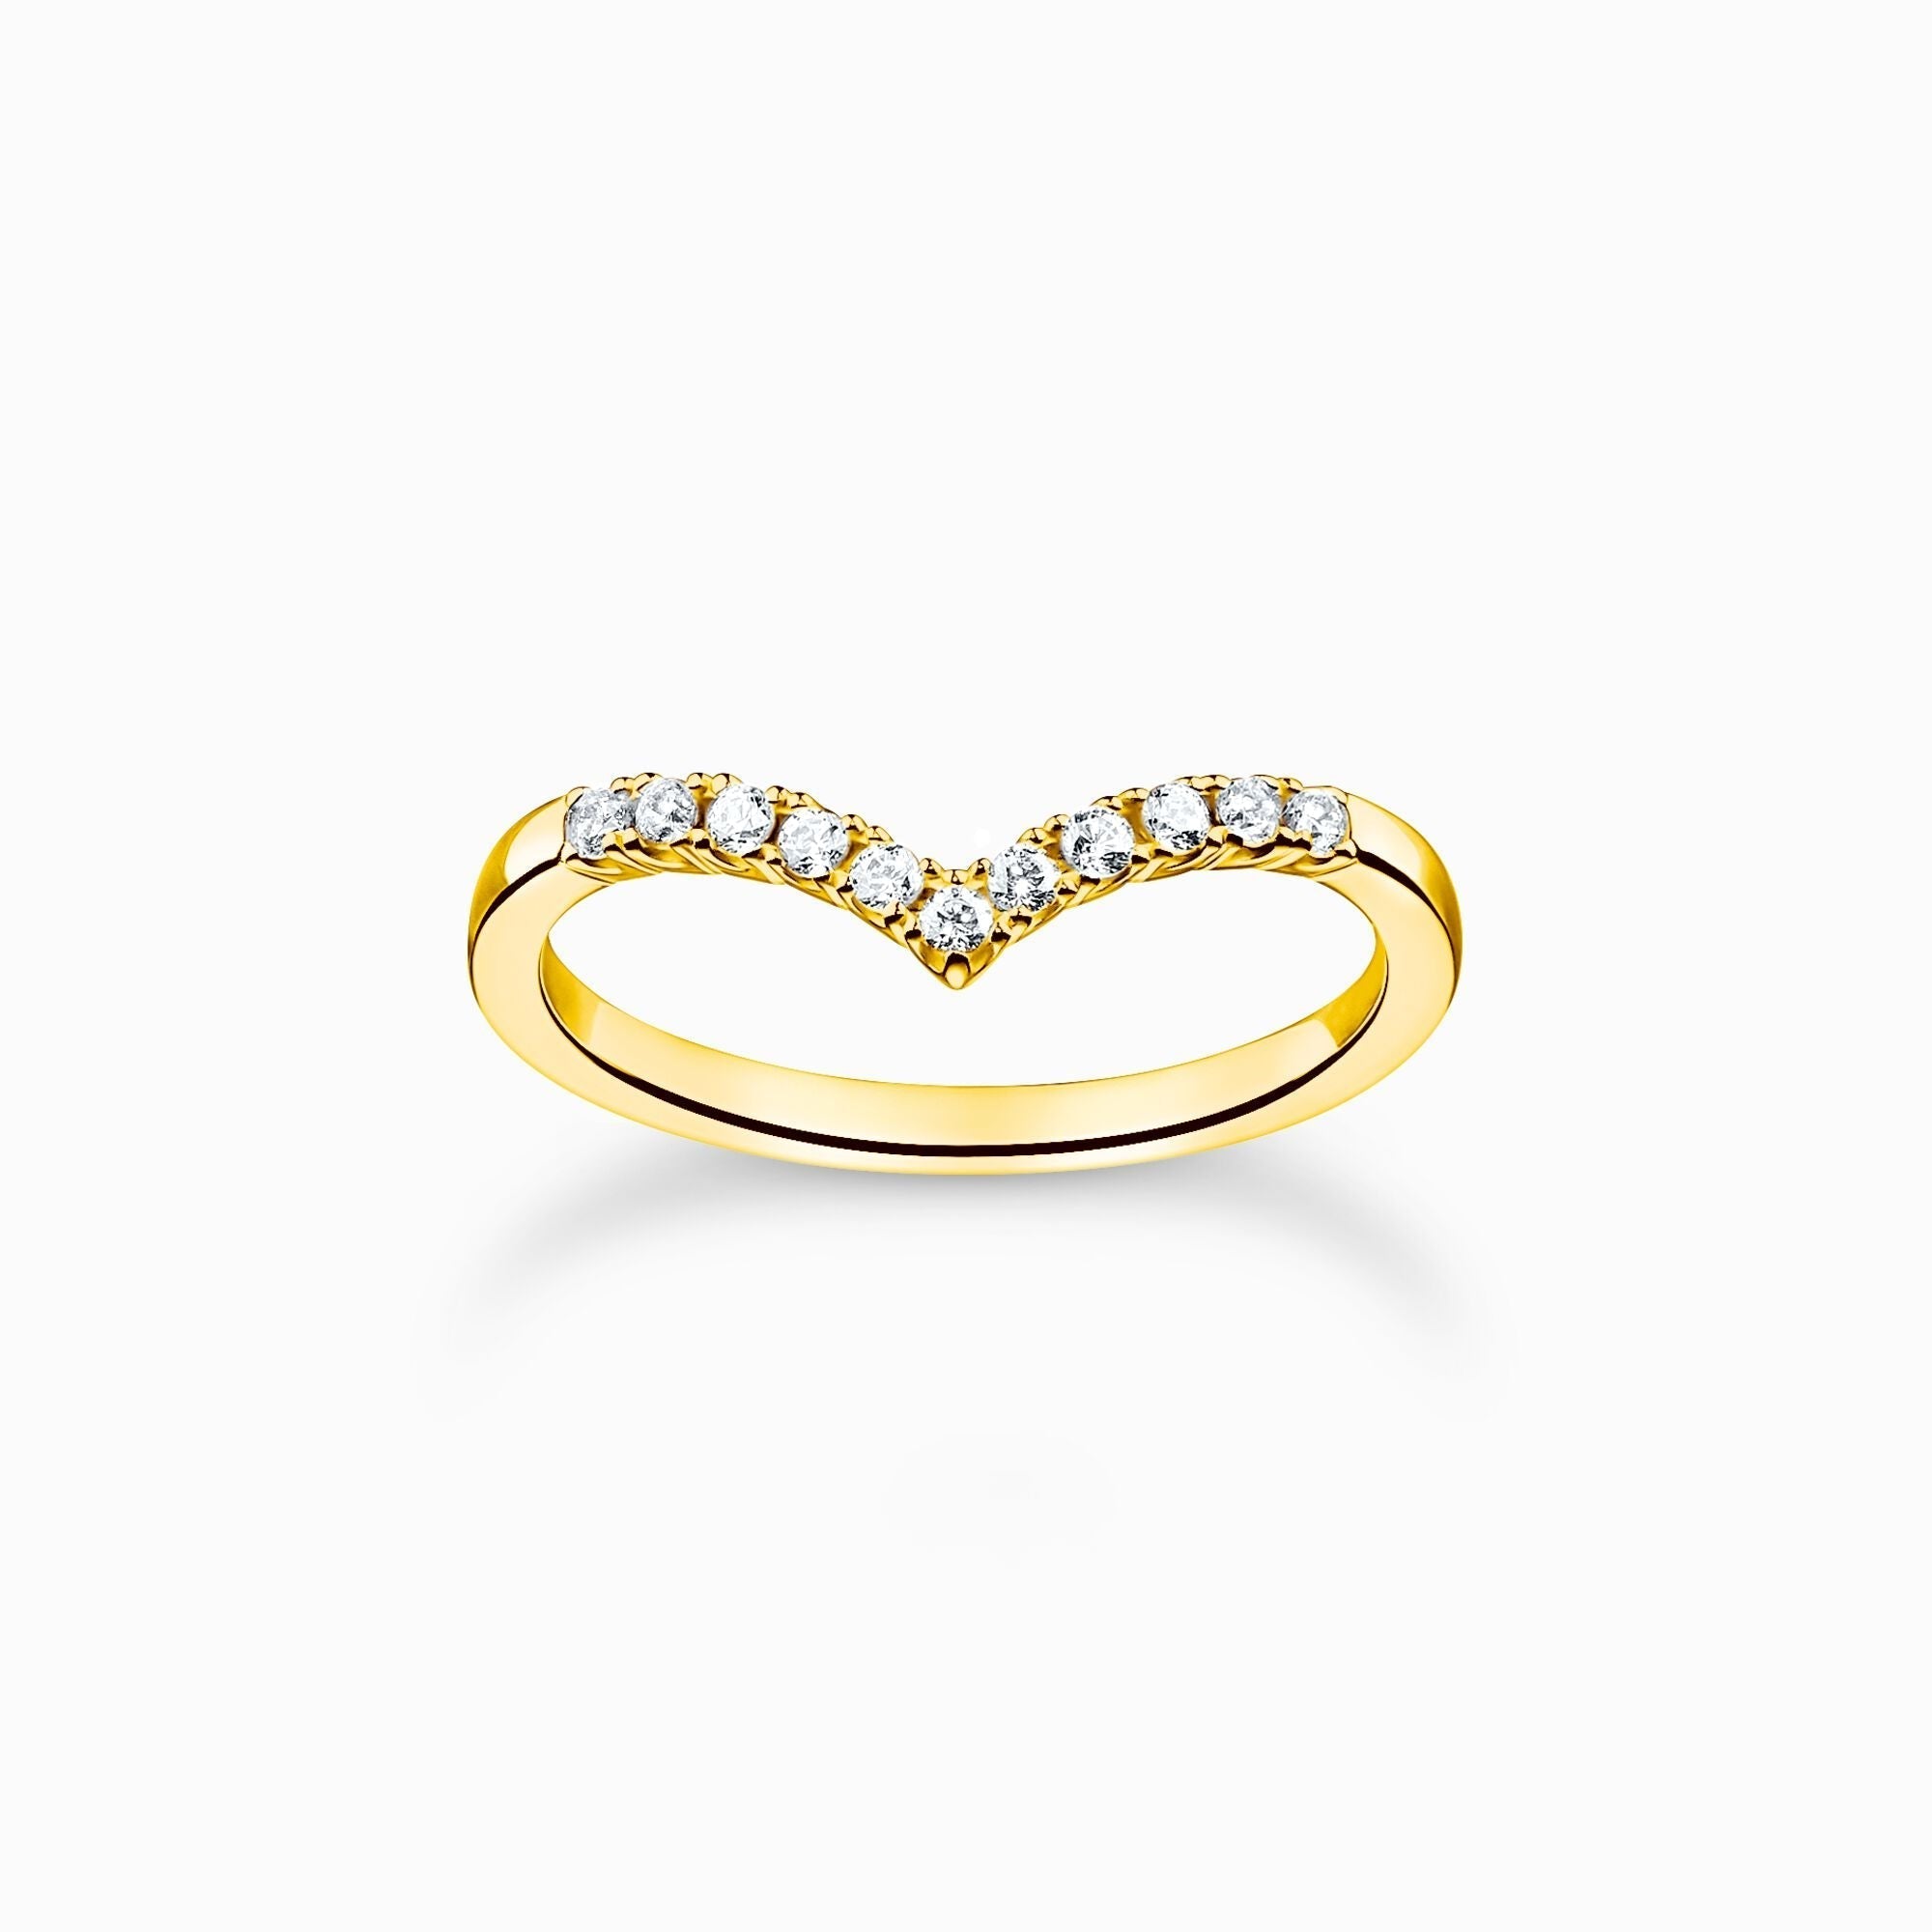 Thomas Sabo Charm Club Yellow Gold Plated Sterling Silver V-Shape Ring D